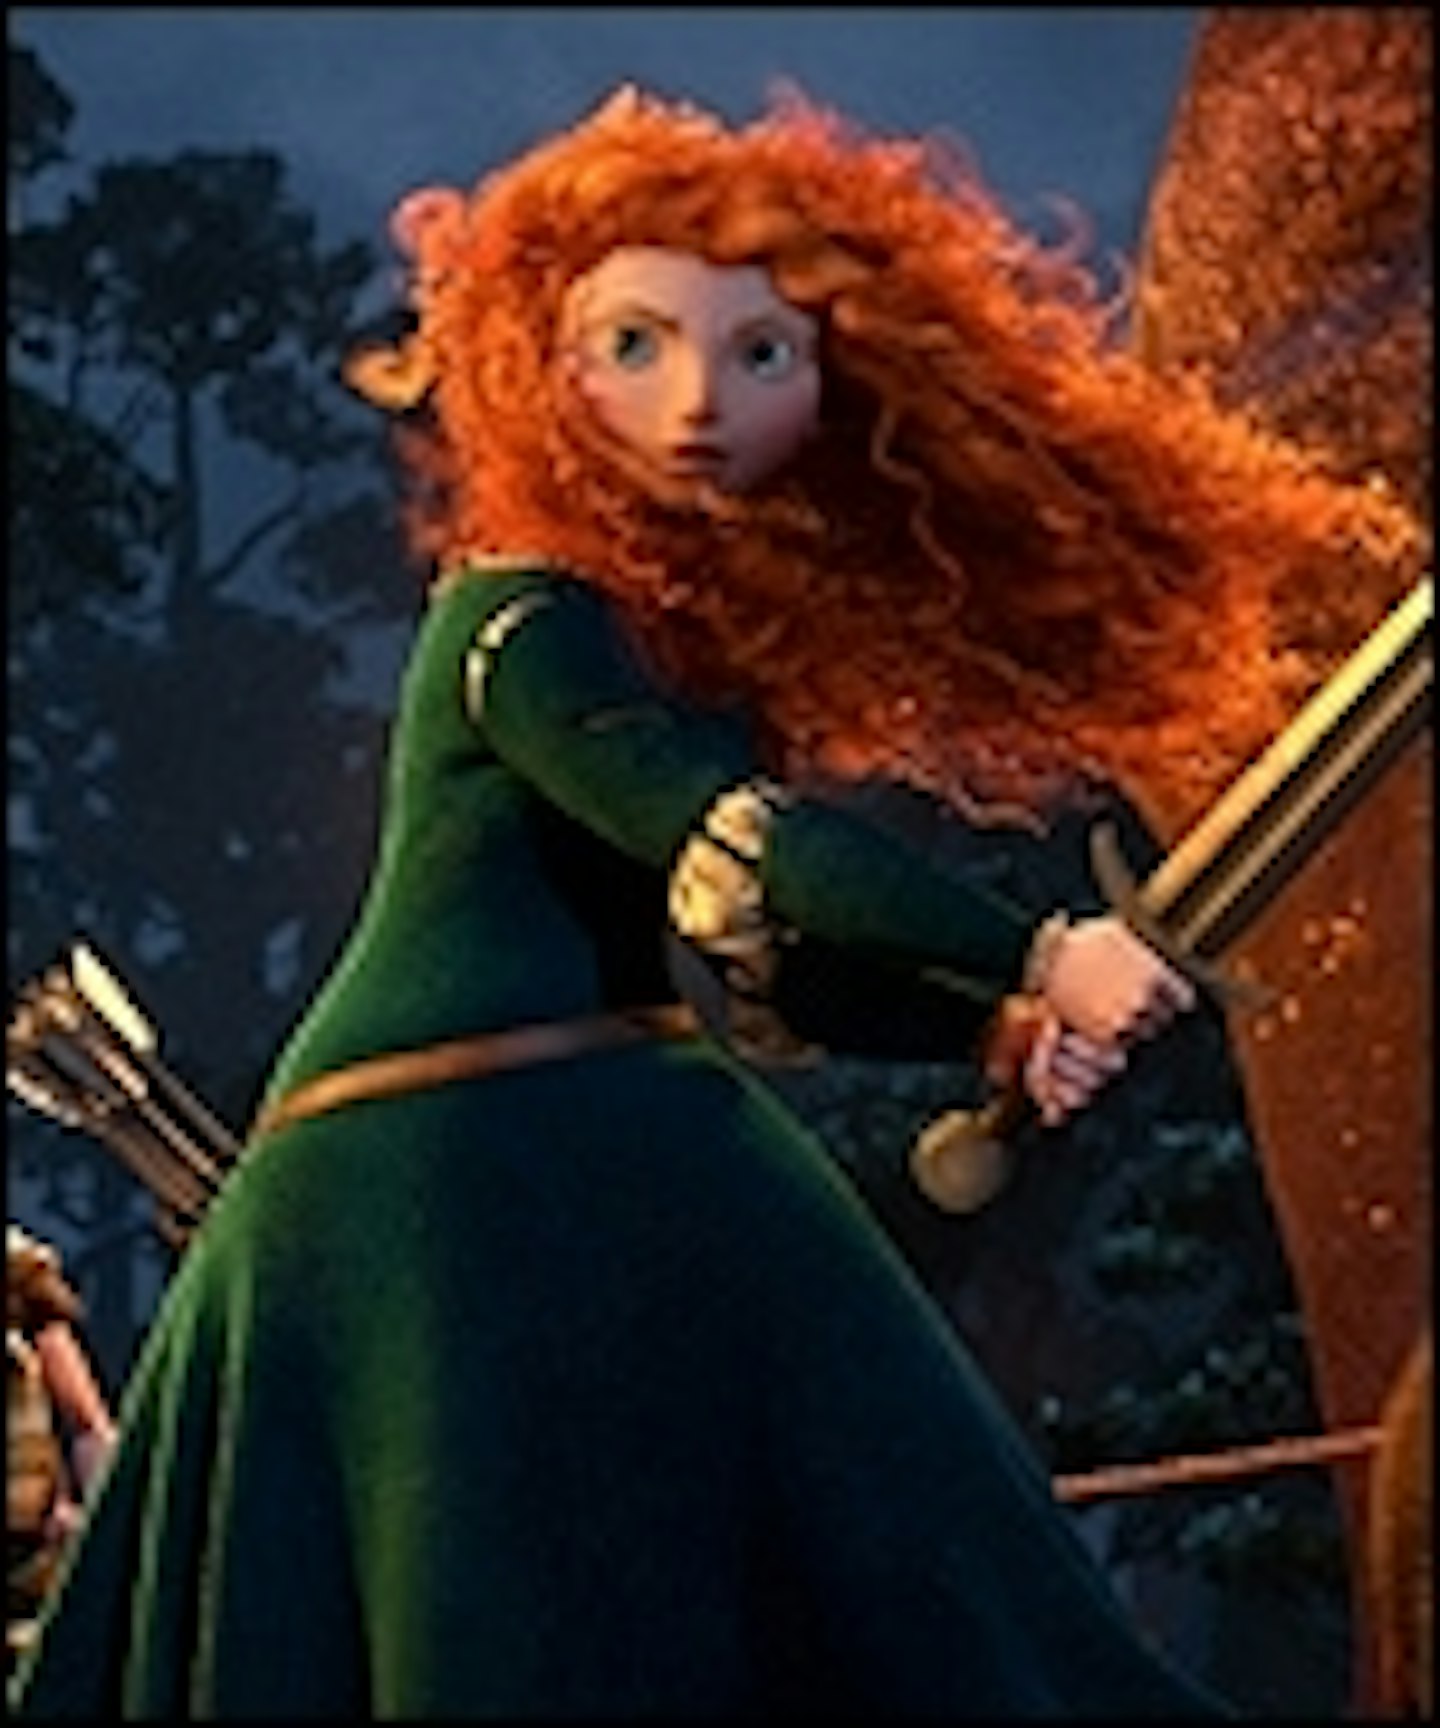 New Brave Images Arrive From Pixar